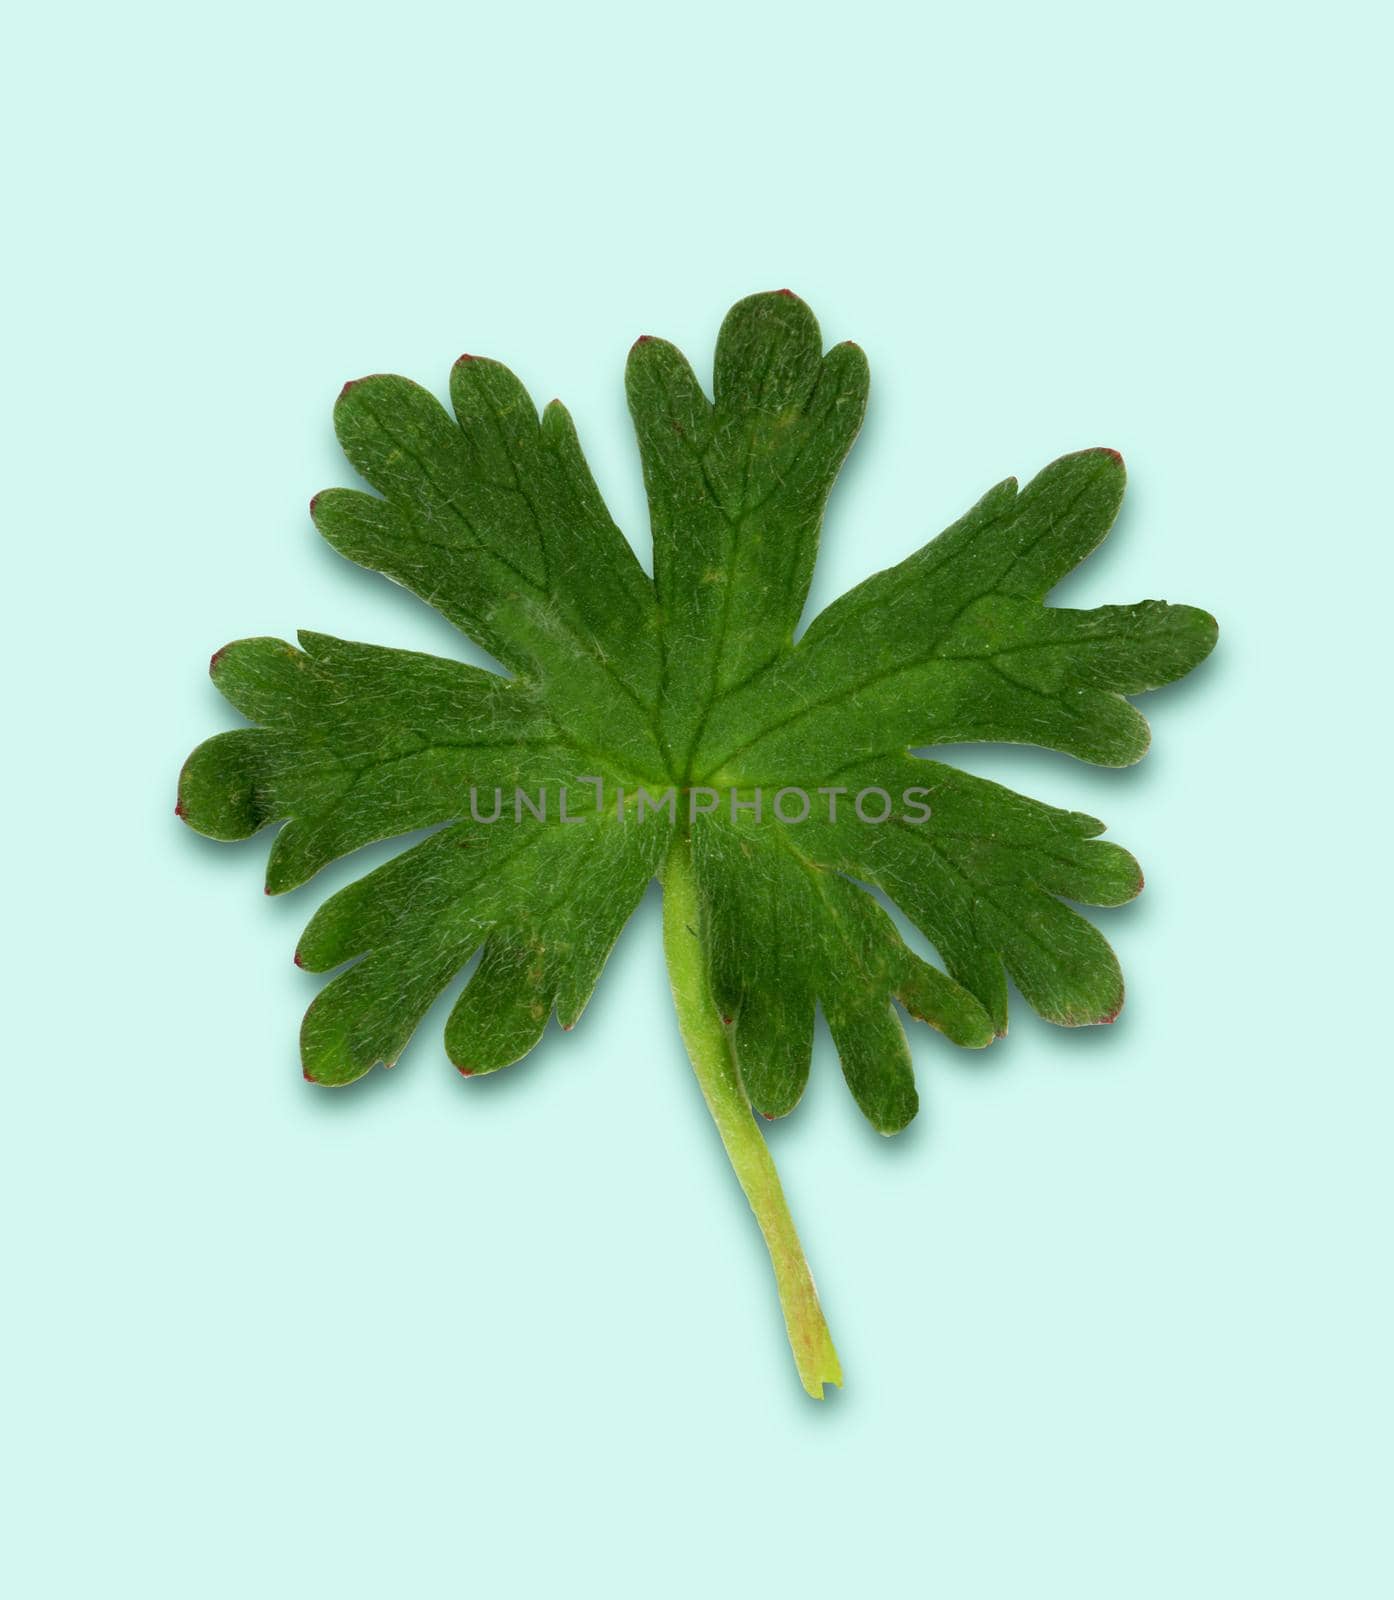 Leaf from a field flower. Cut out on a pale blue background